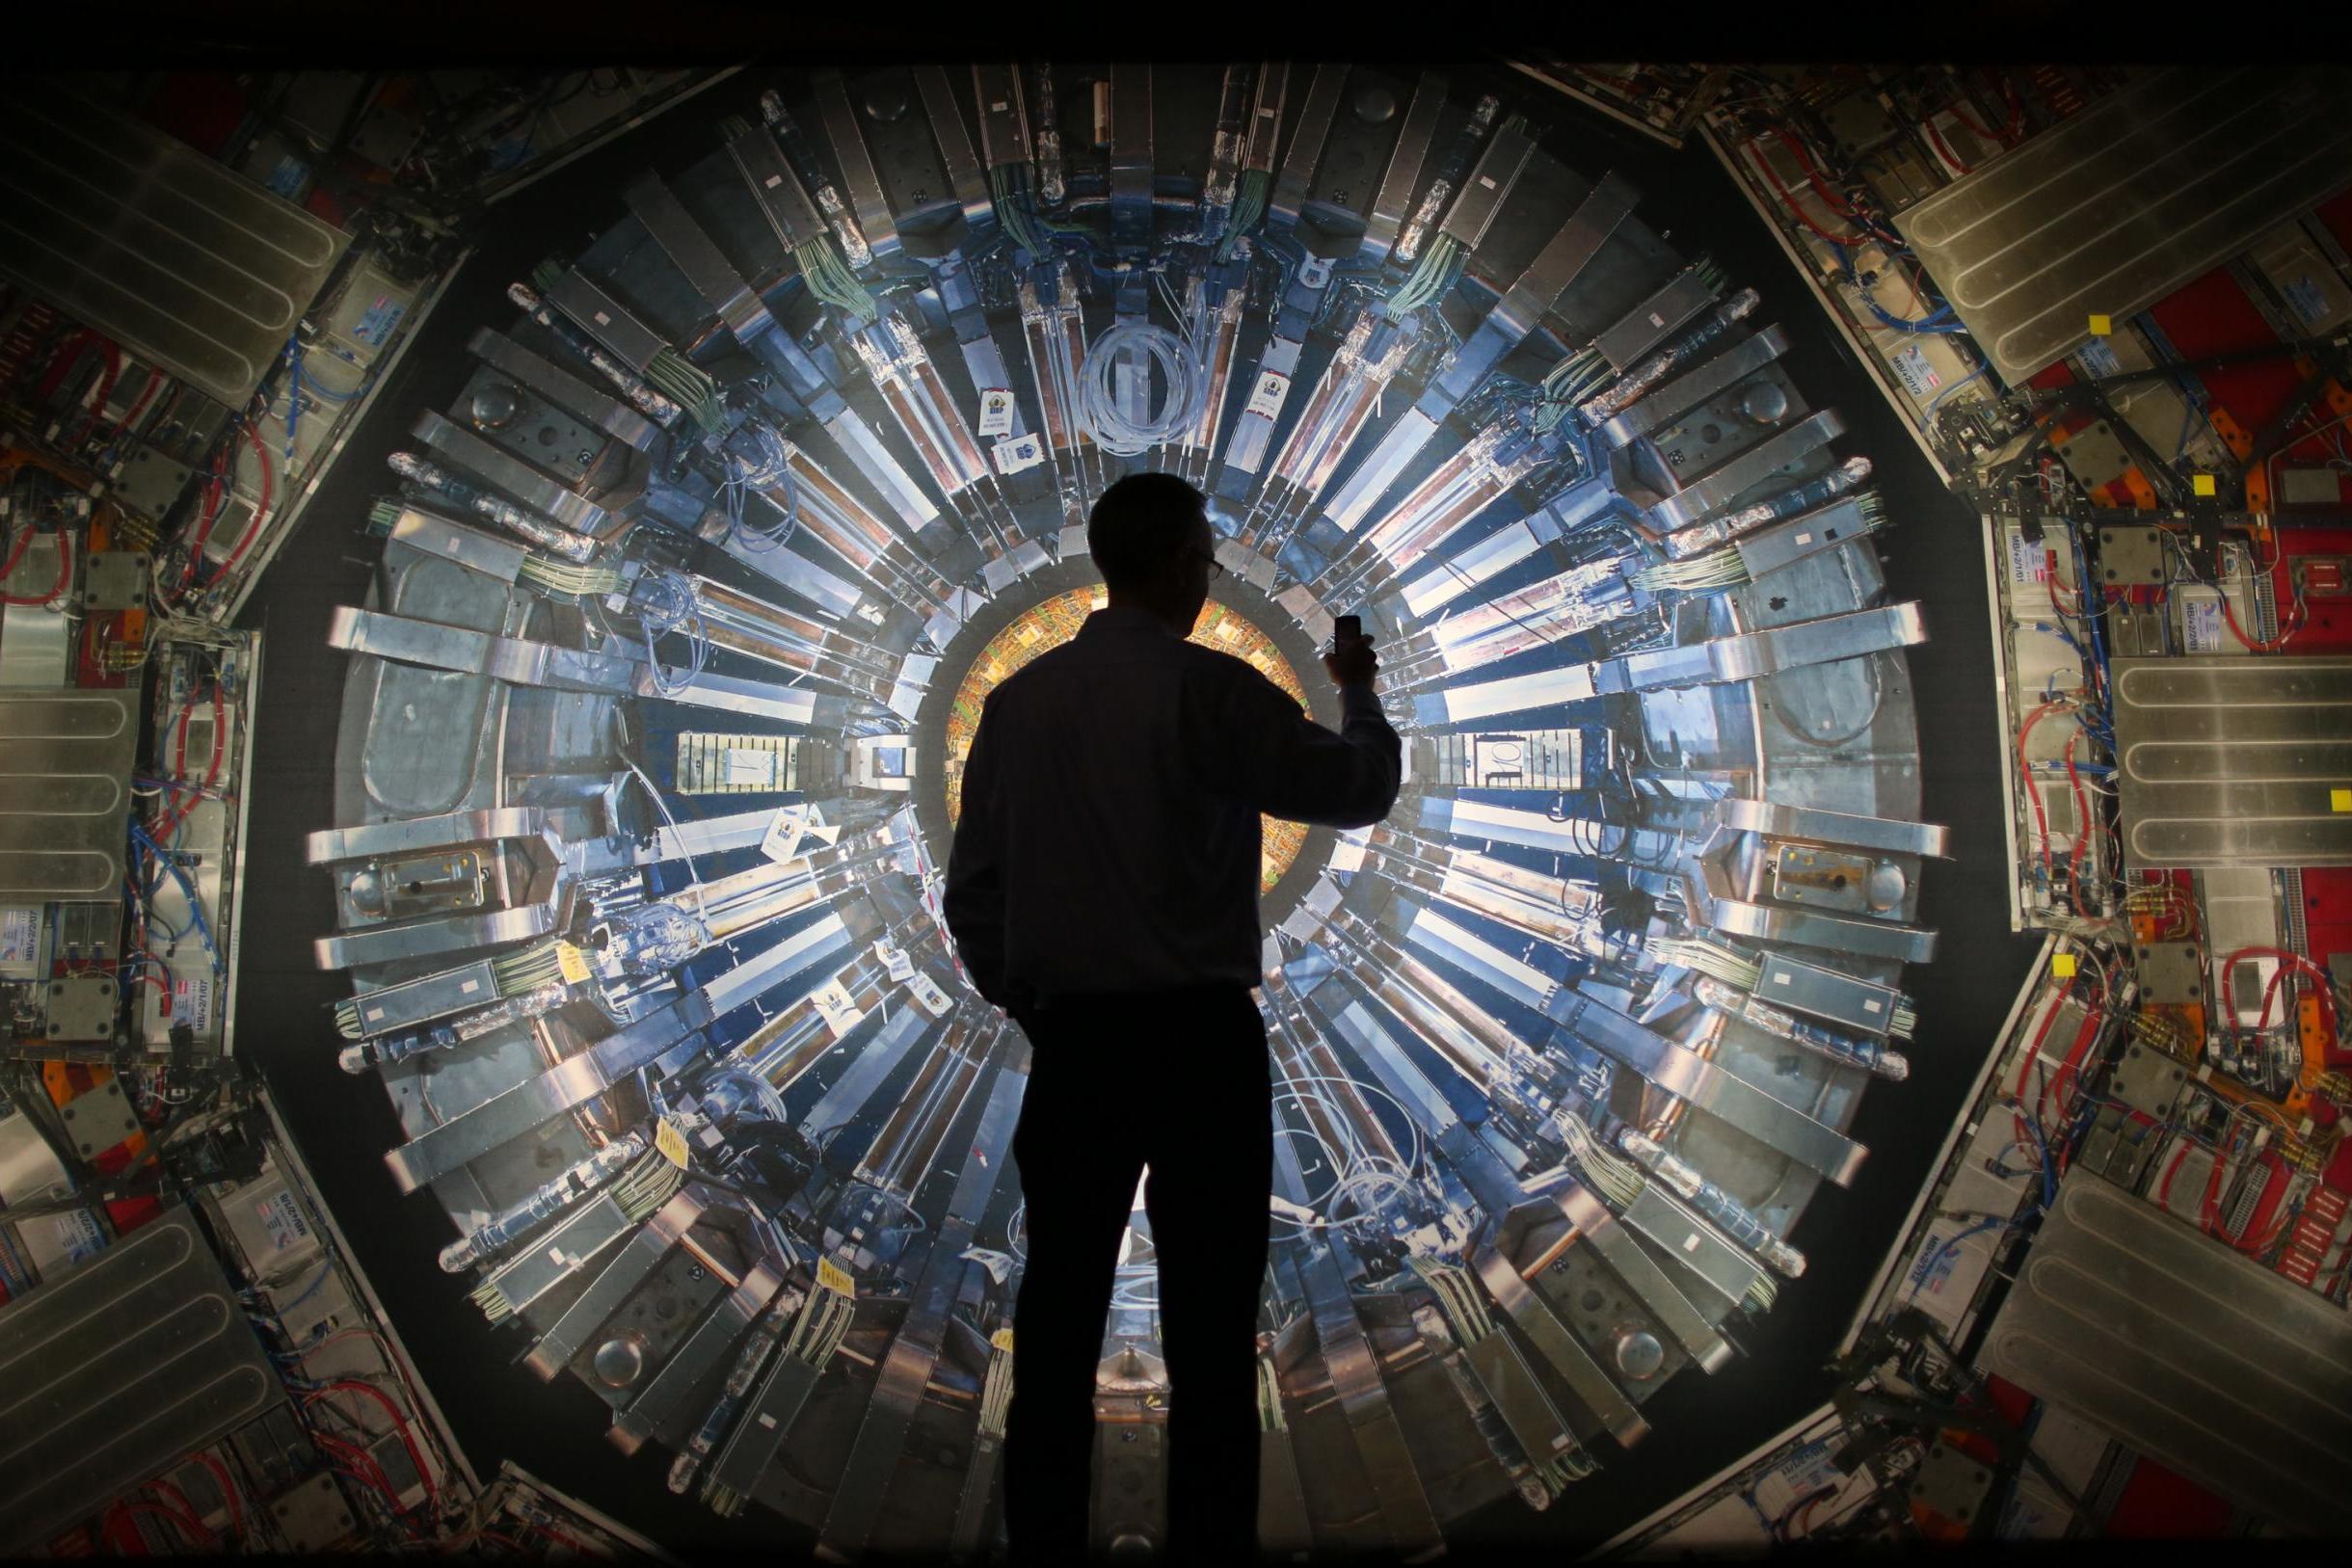 A visitor takes a photo of an image of the Large Hadron Collider at the Science Museum’s ‘Collider’ exhibition in 2013 (Getty)